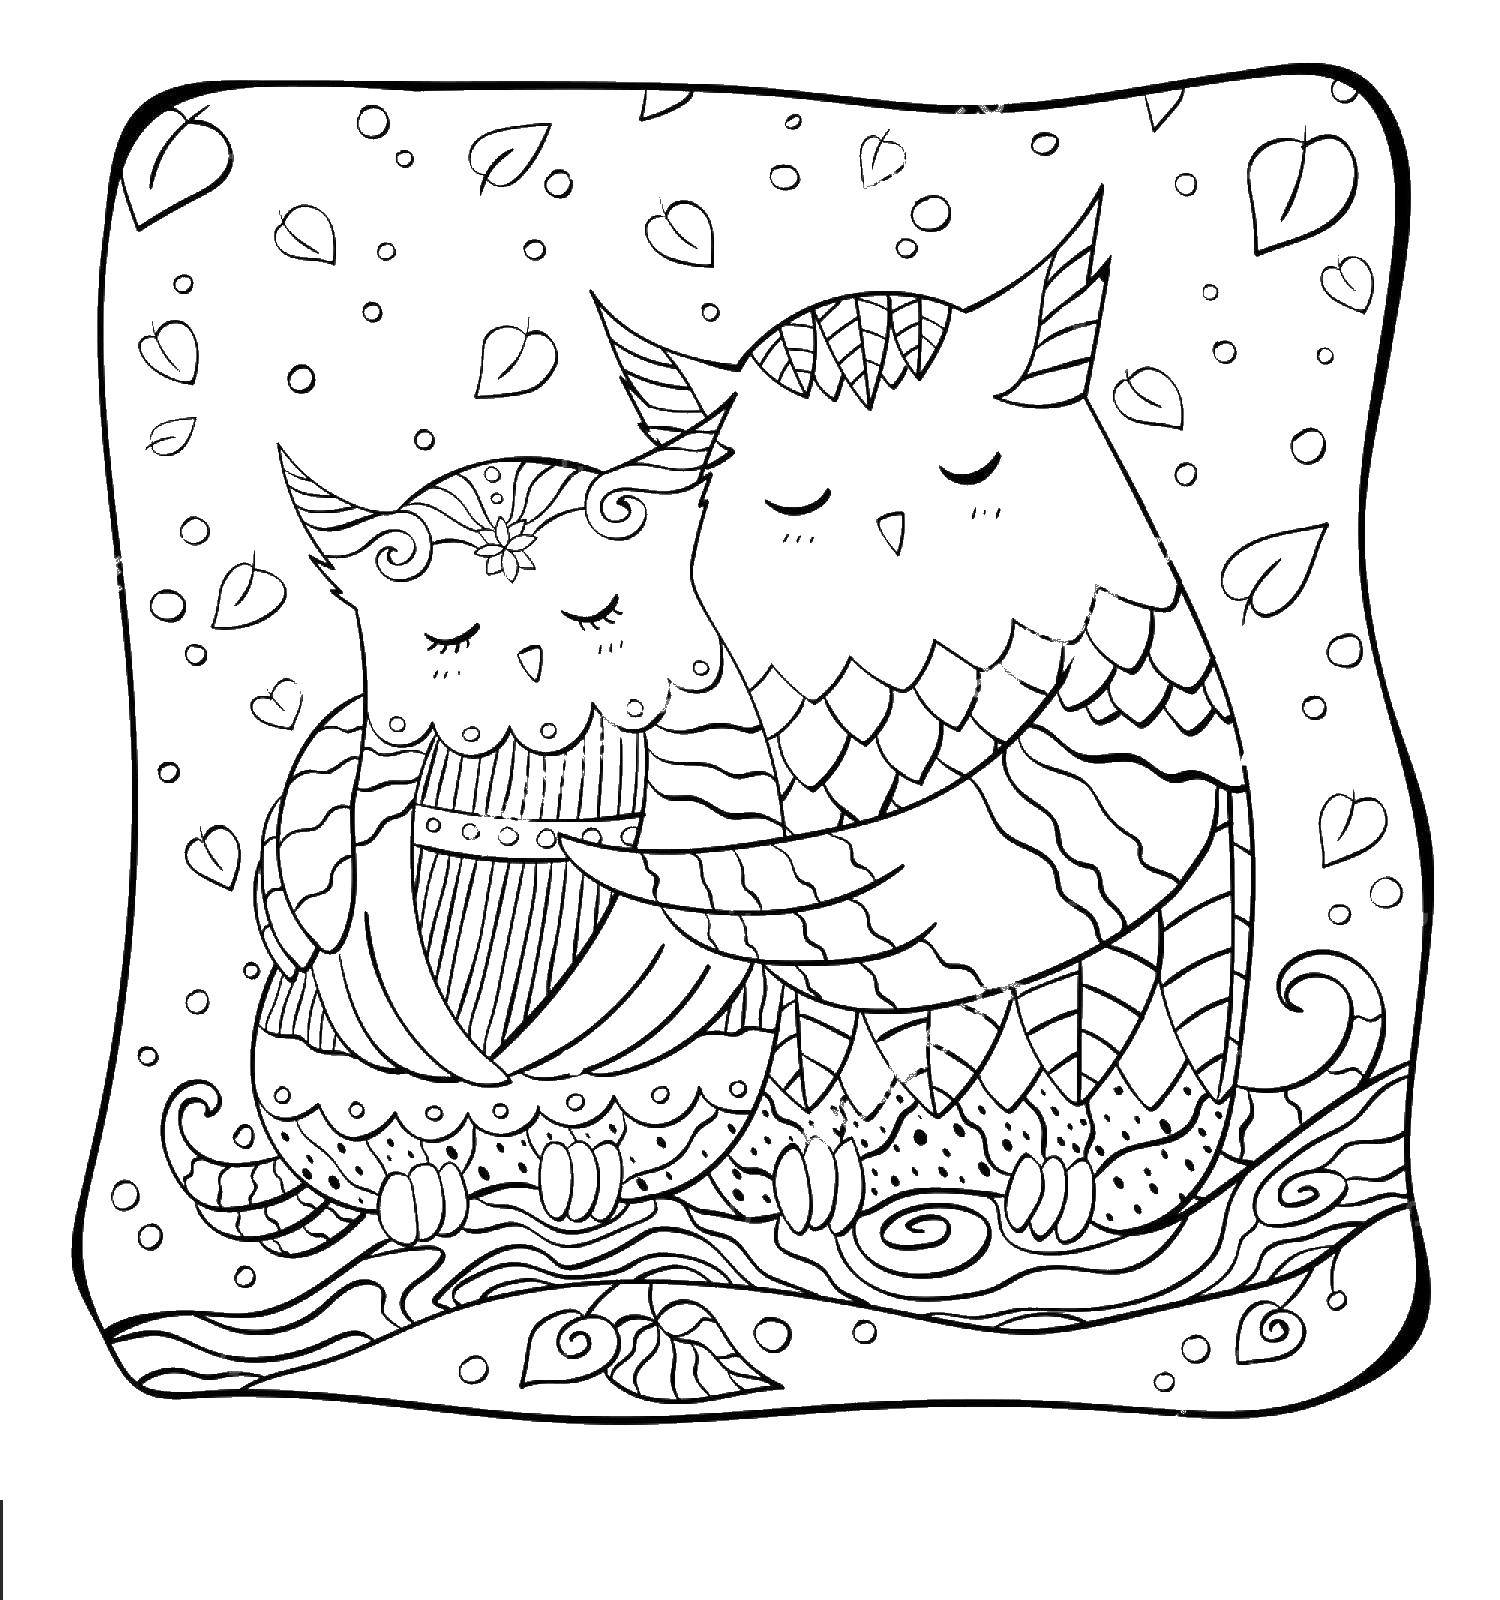 Coloring Owls hugging. Category Valentines day. Tags:  Valentines day, greetings, owls.